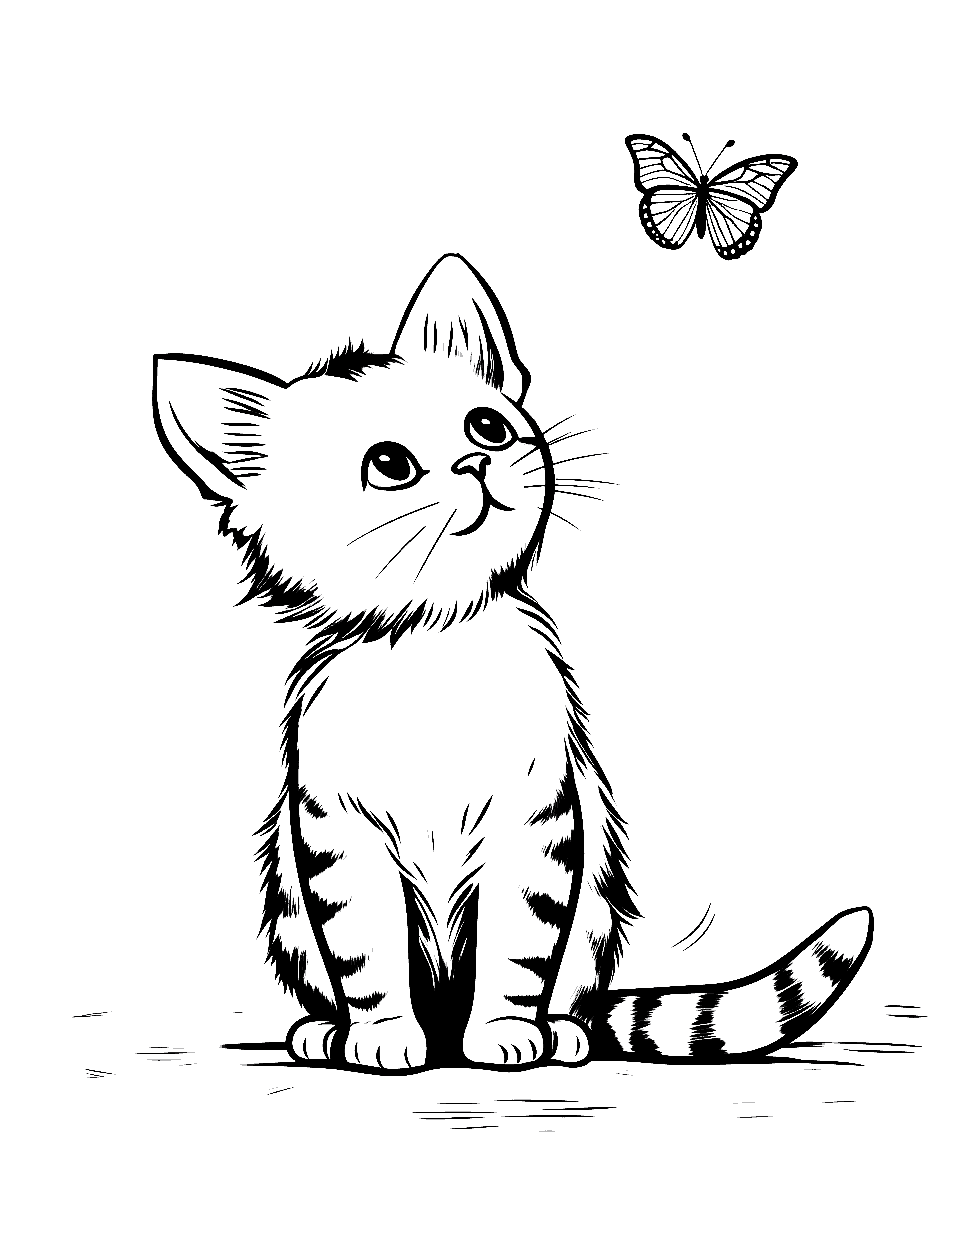 Realistic Tabby Kitten Coloring Page - A tabby kitten looking curiously at a fluttering butterfly.